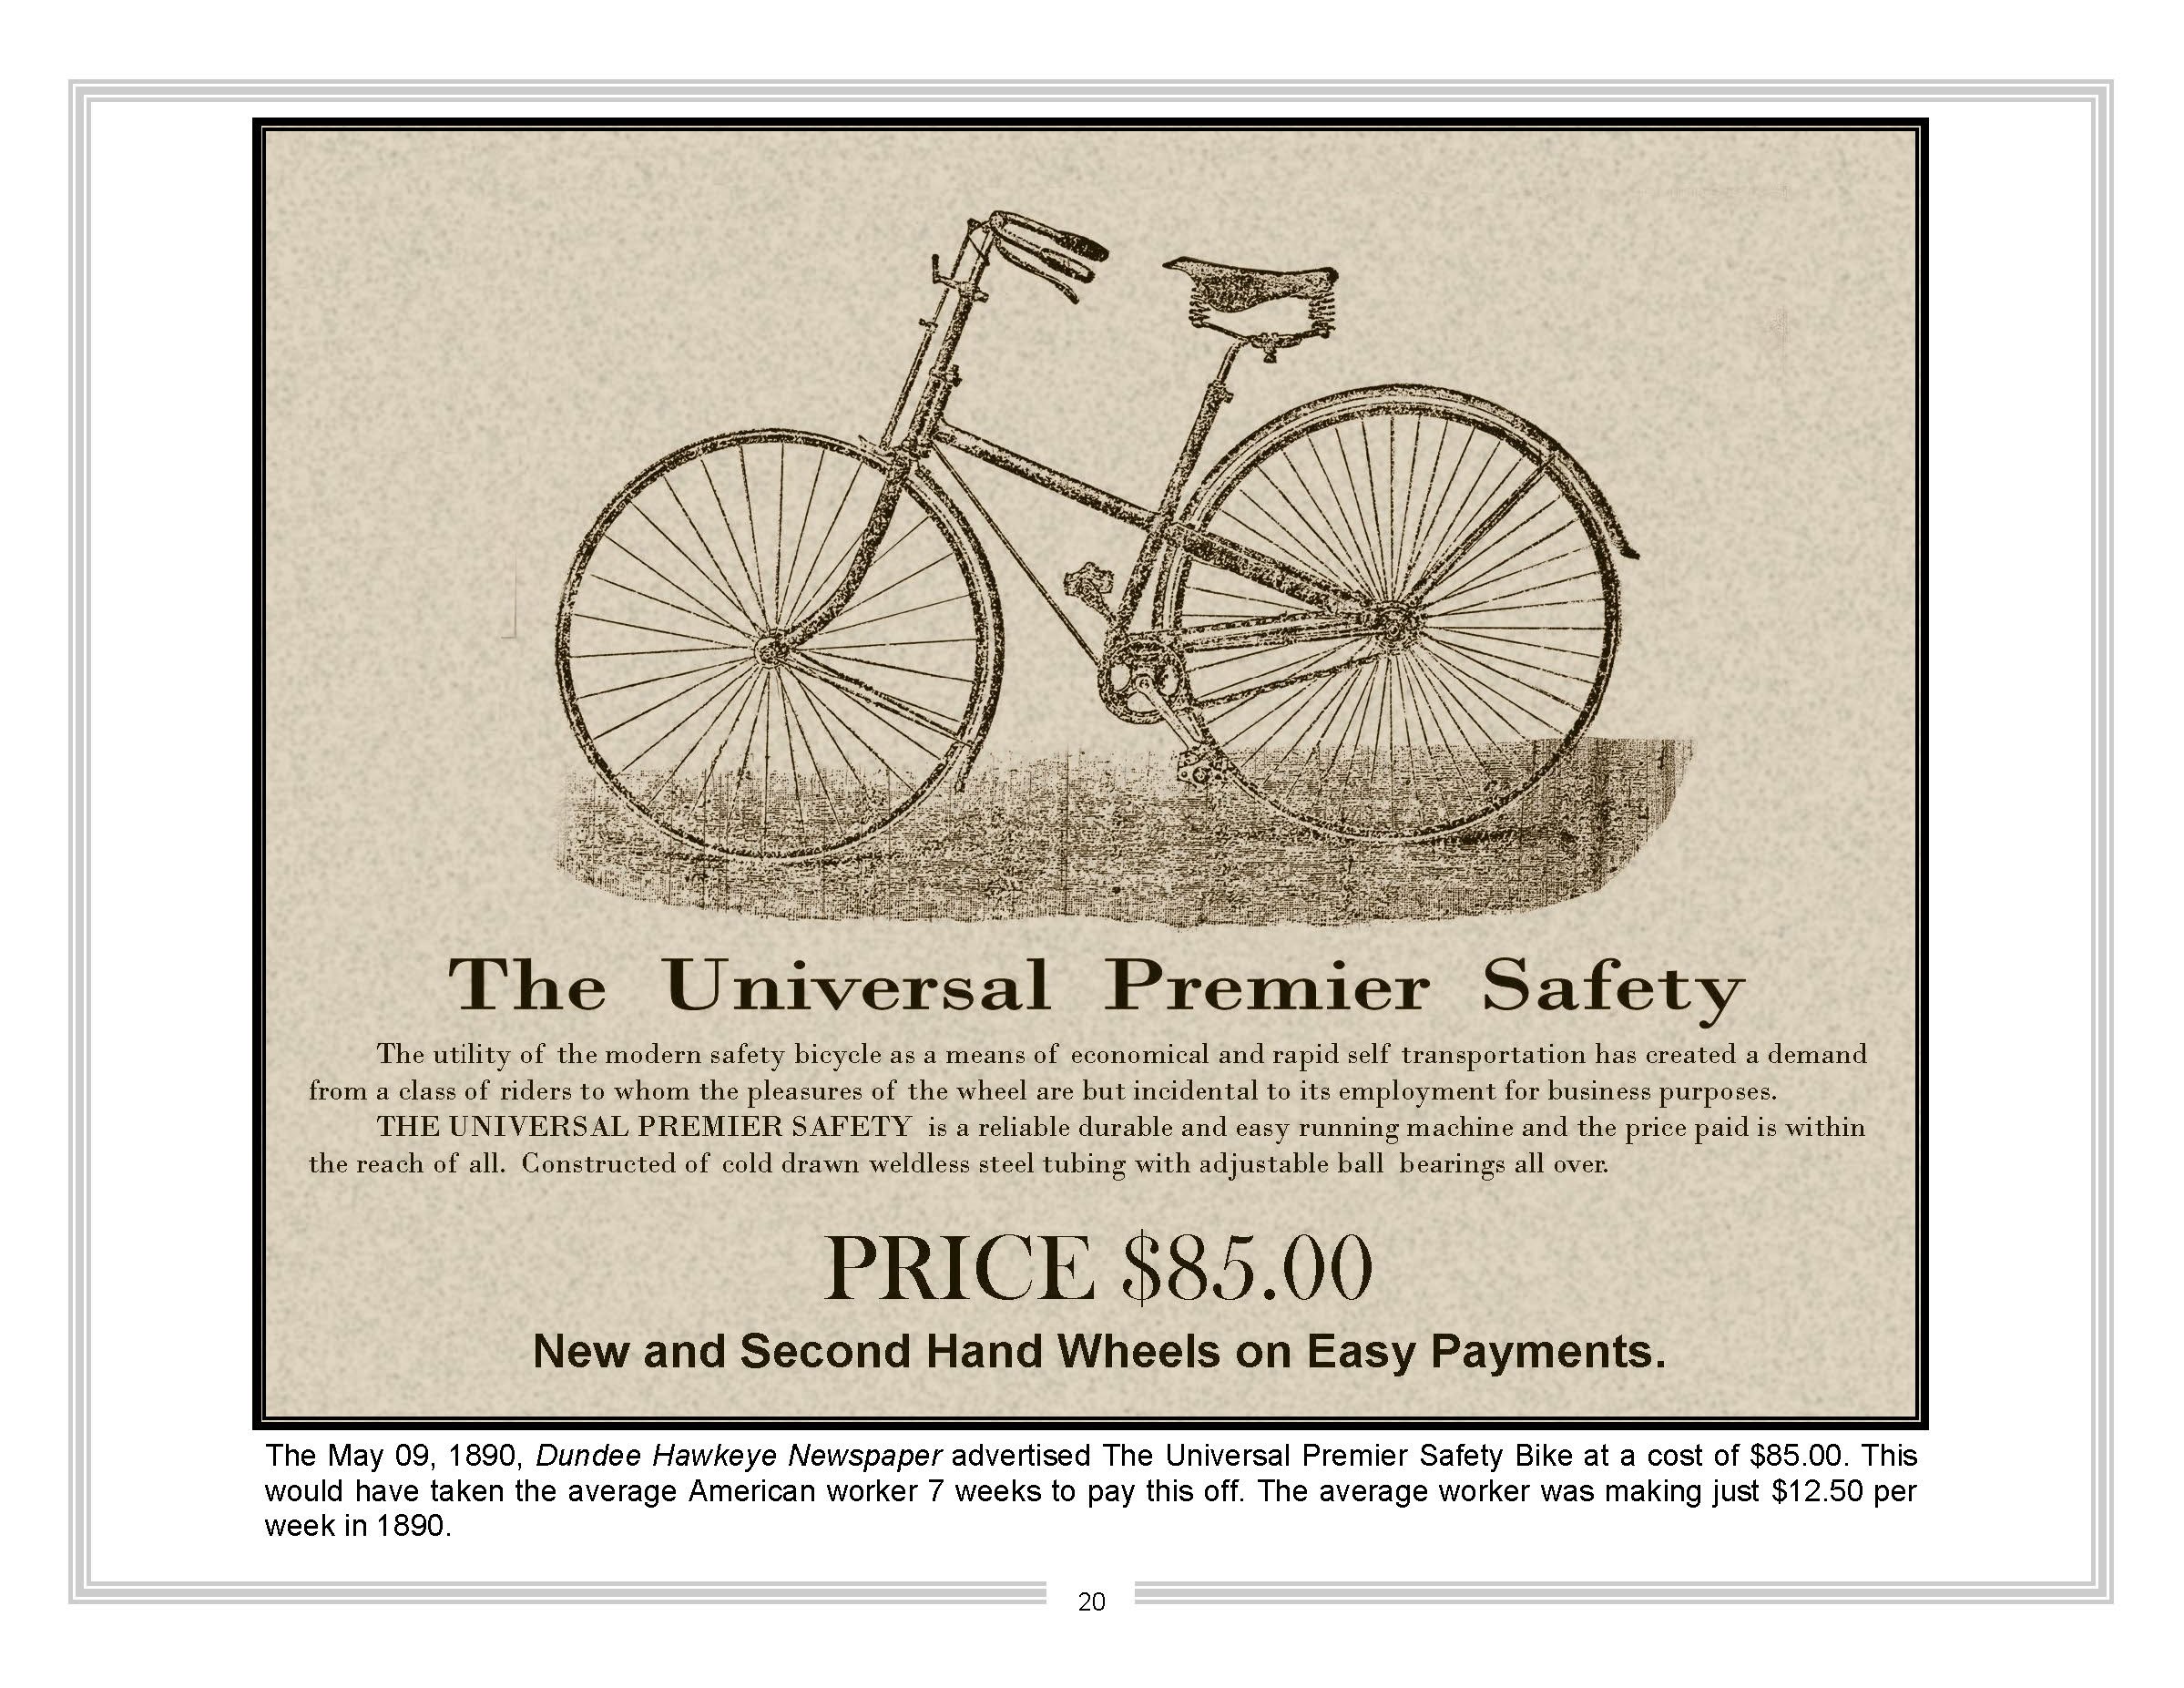 Book - The History of the Bicycle_Page_20.jpg